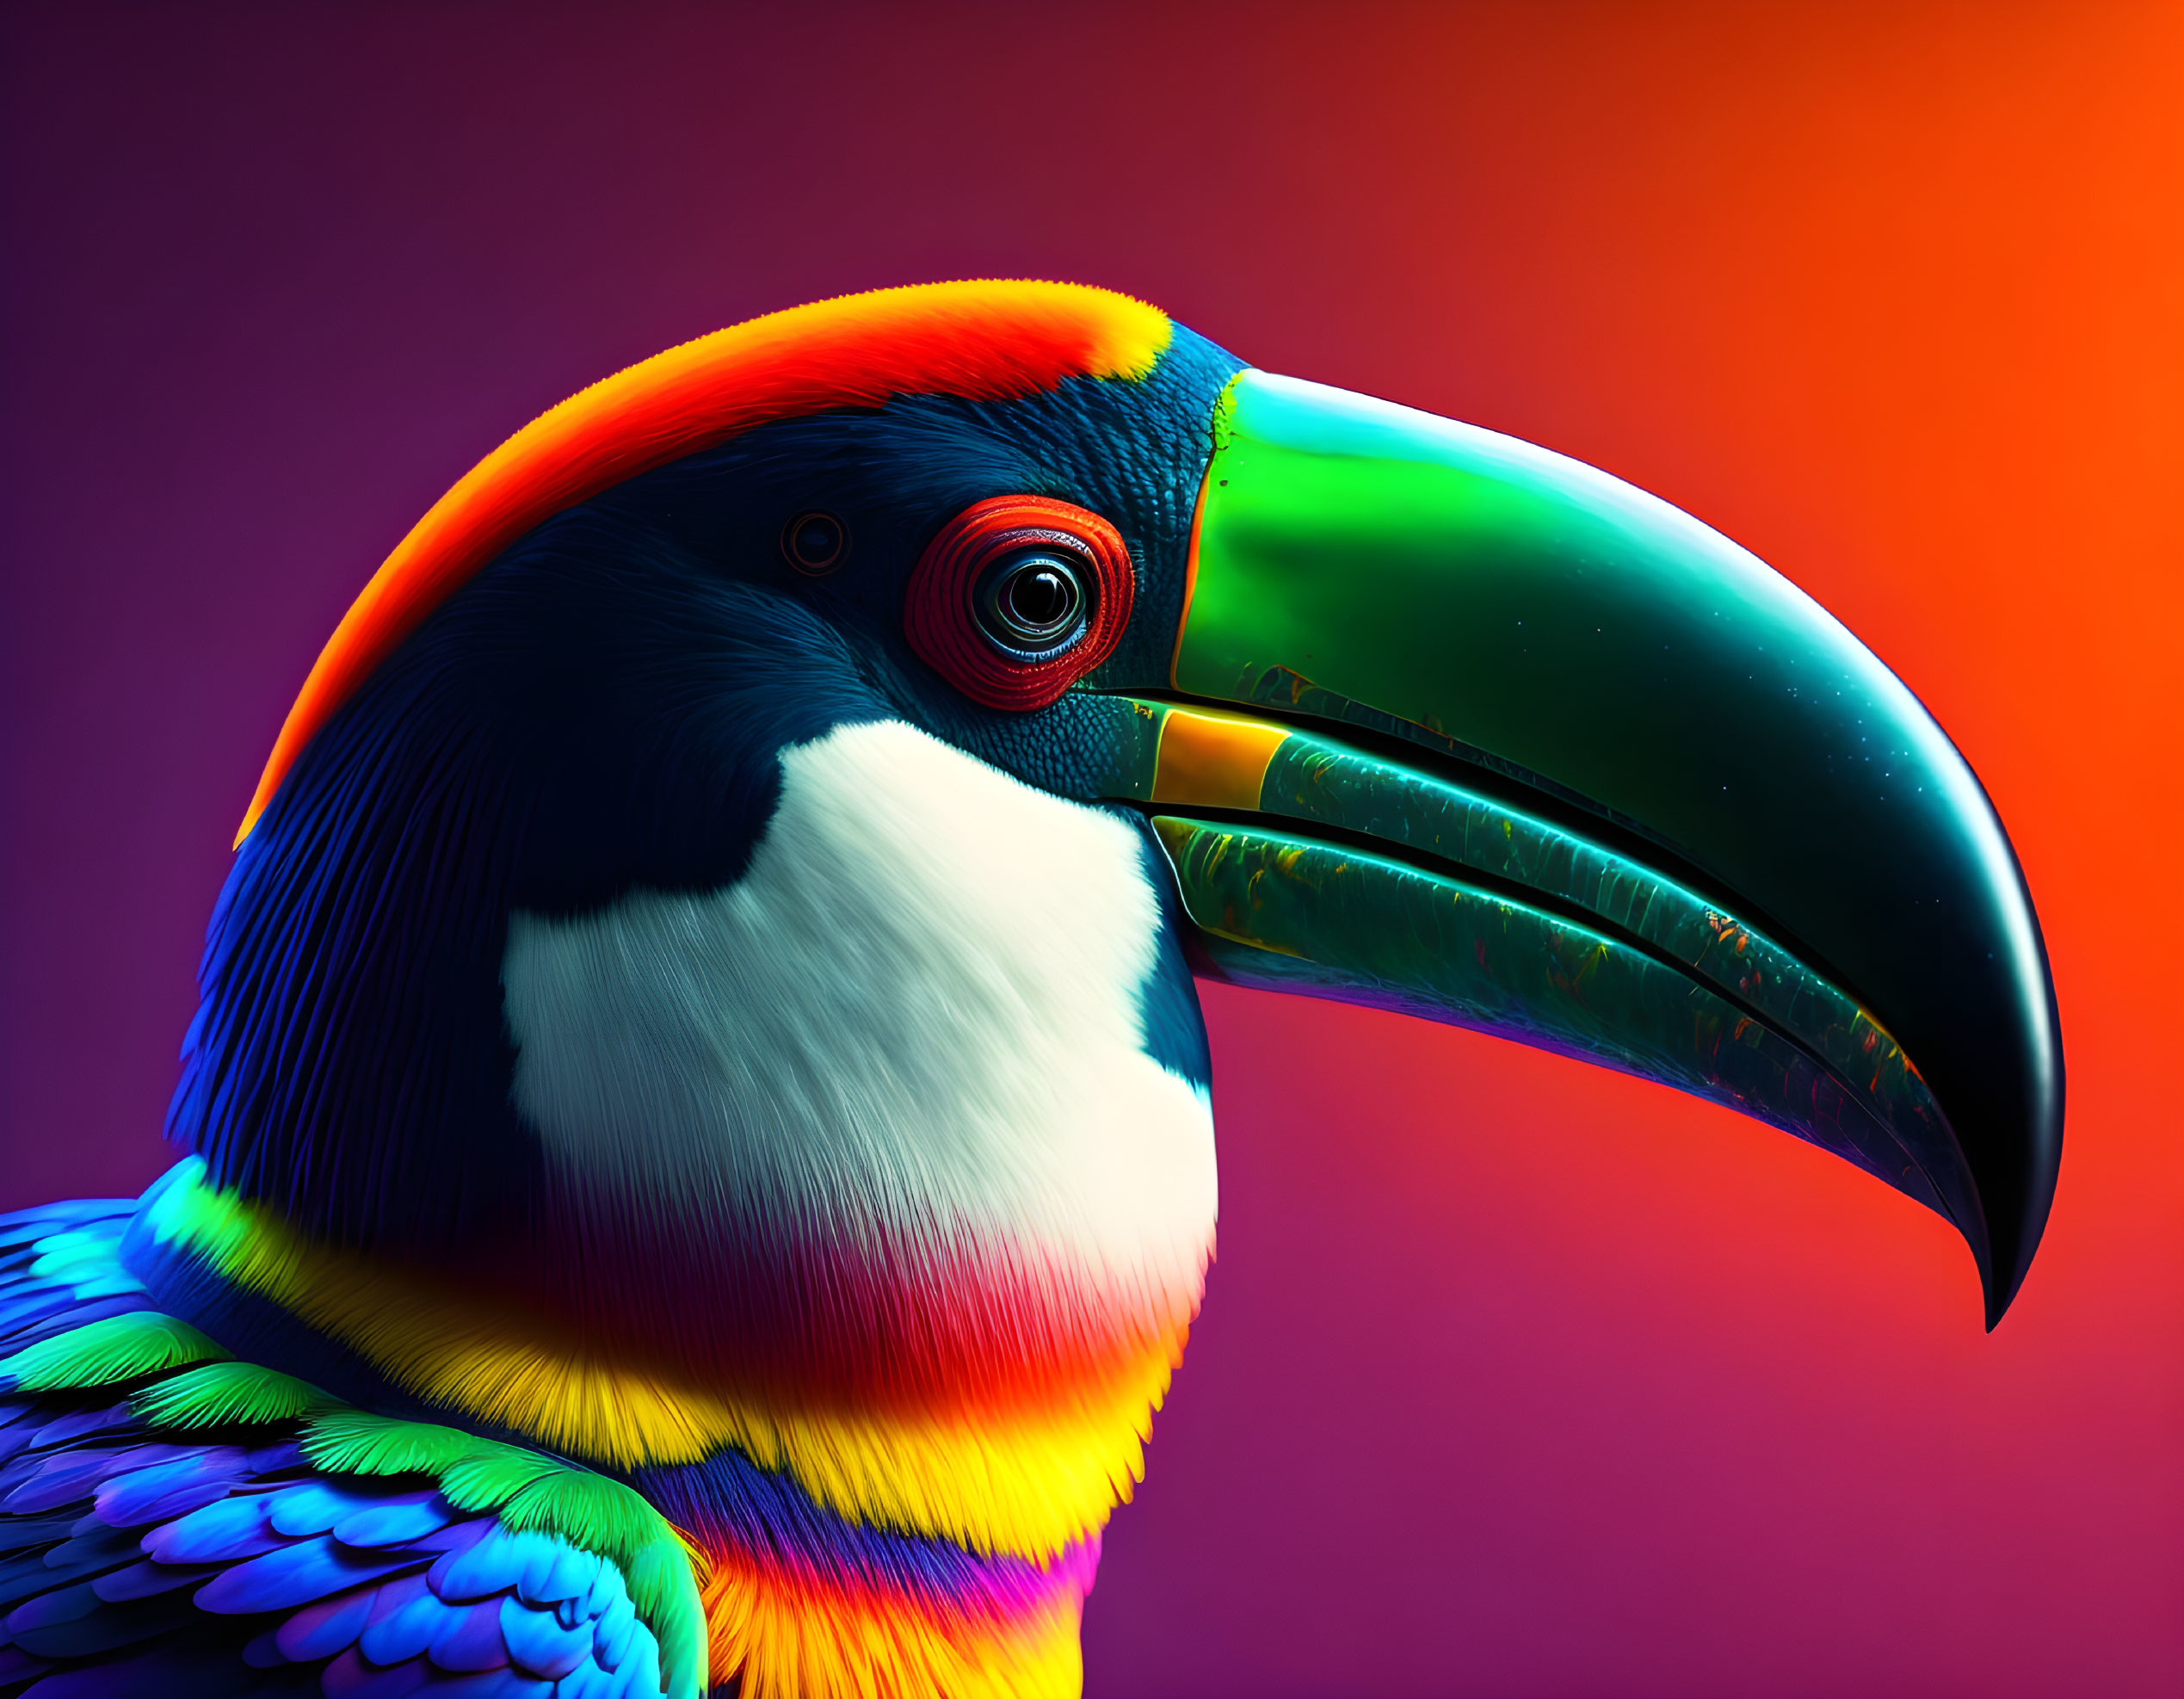 Colorful Toucan Close-Up on Purple and Orange Gradient Background